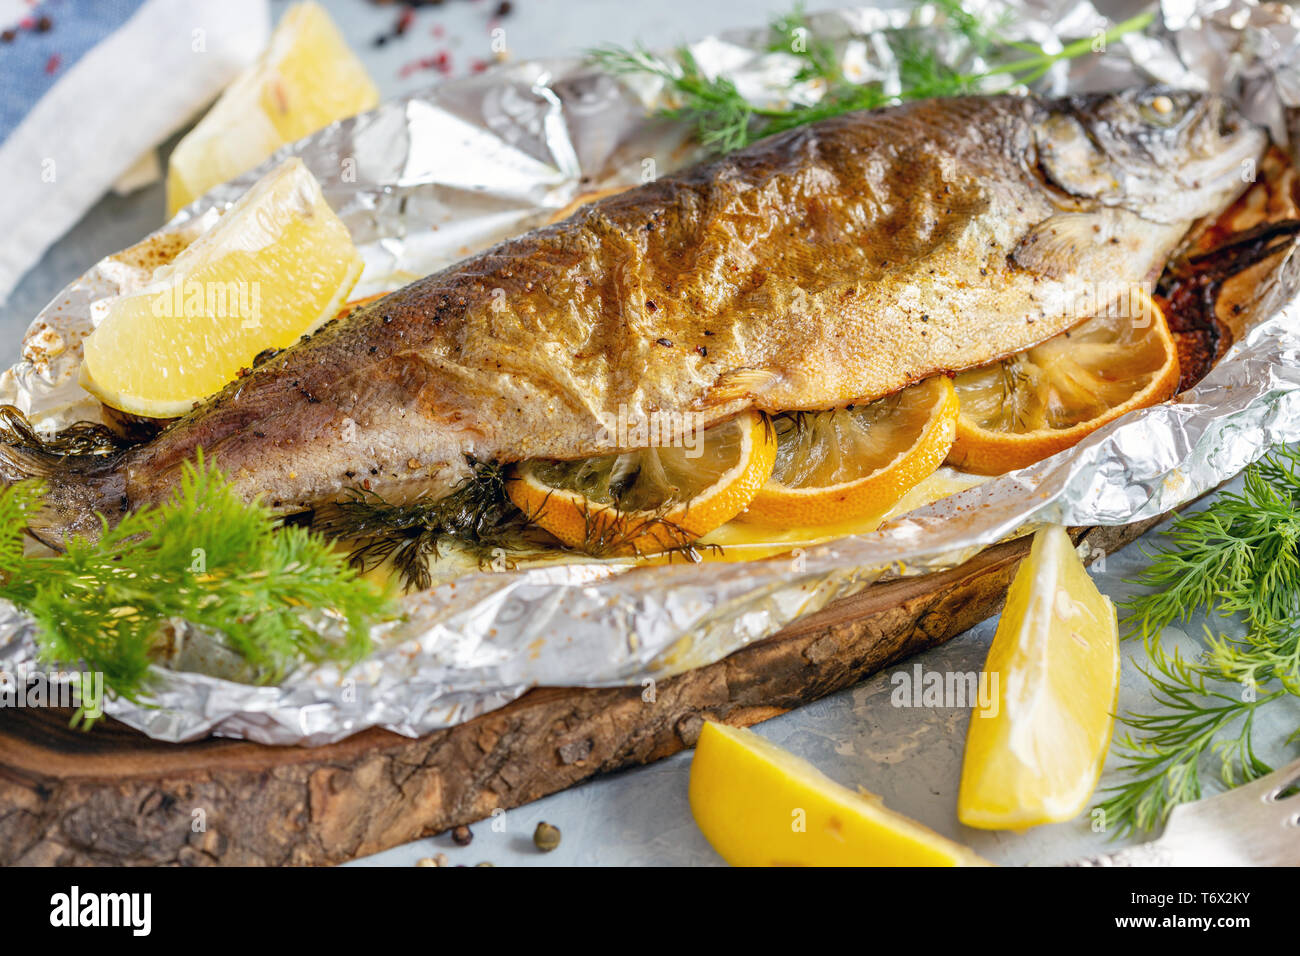 Baked lake trout with lemon slices. Stock Photo